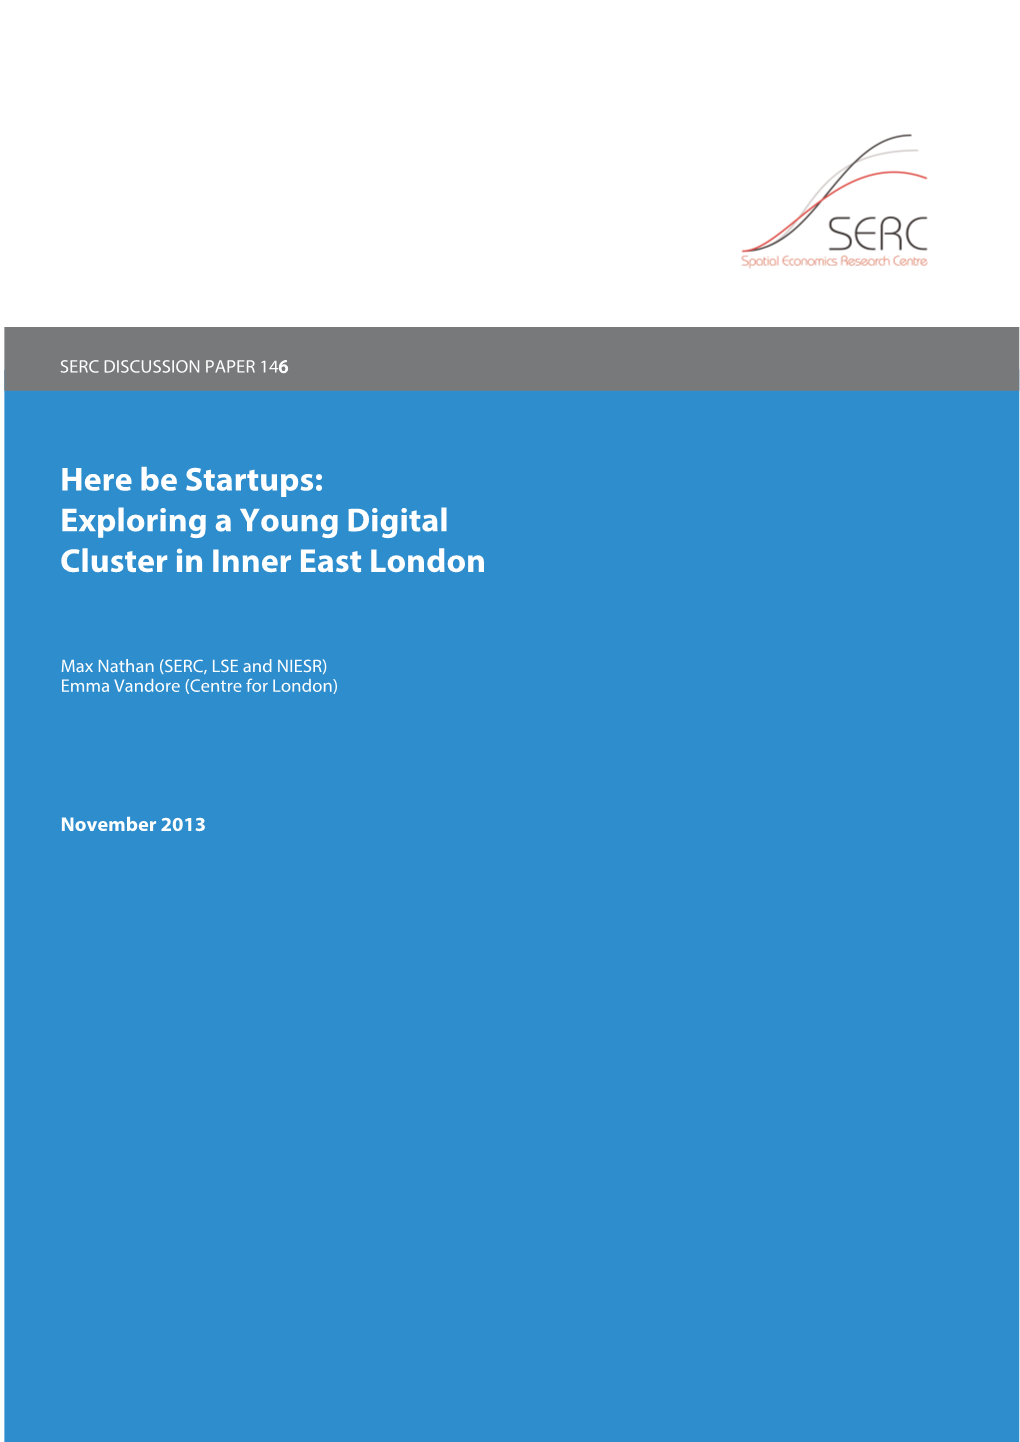 Here Be Startups: Exploring a Young Digital Cluster in Inner East London